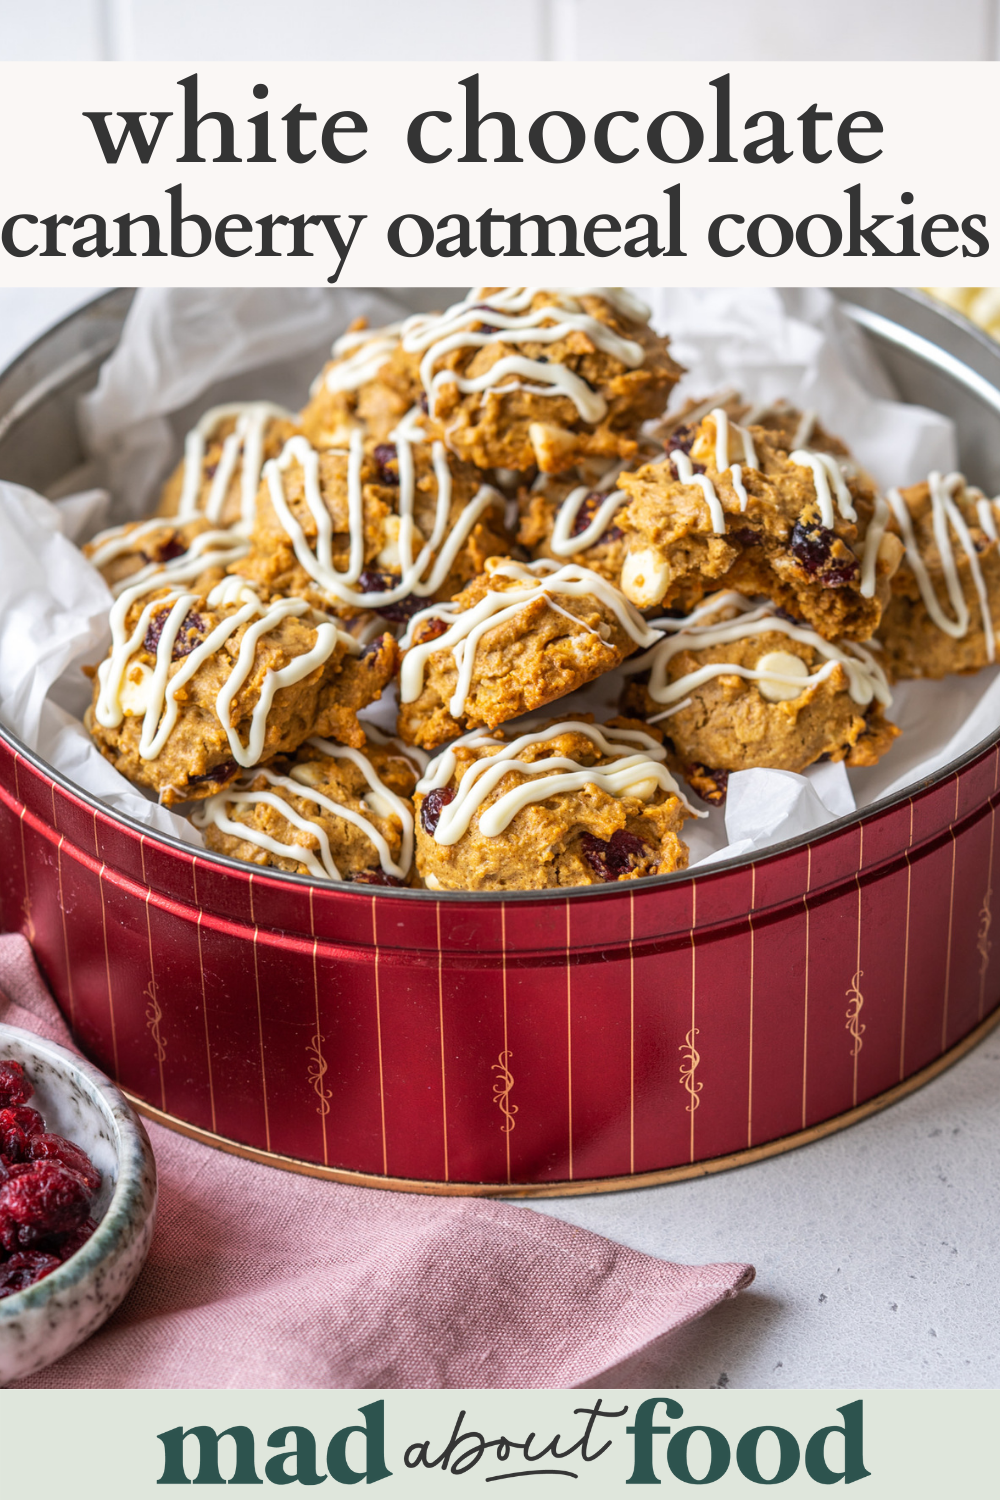 Image for pinning White Chocolate Cranberry Oatmeal Cookies recipe on Pinterest